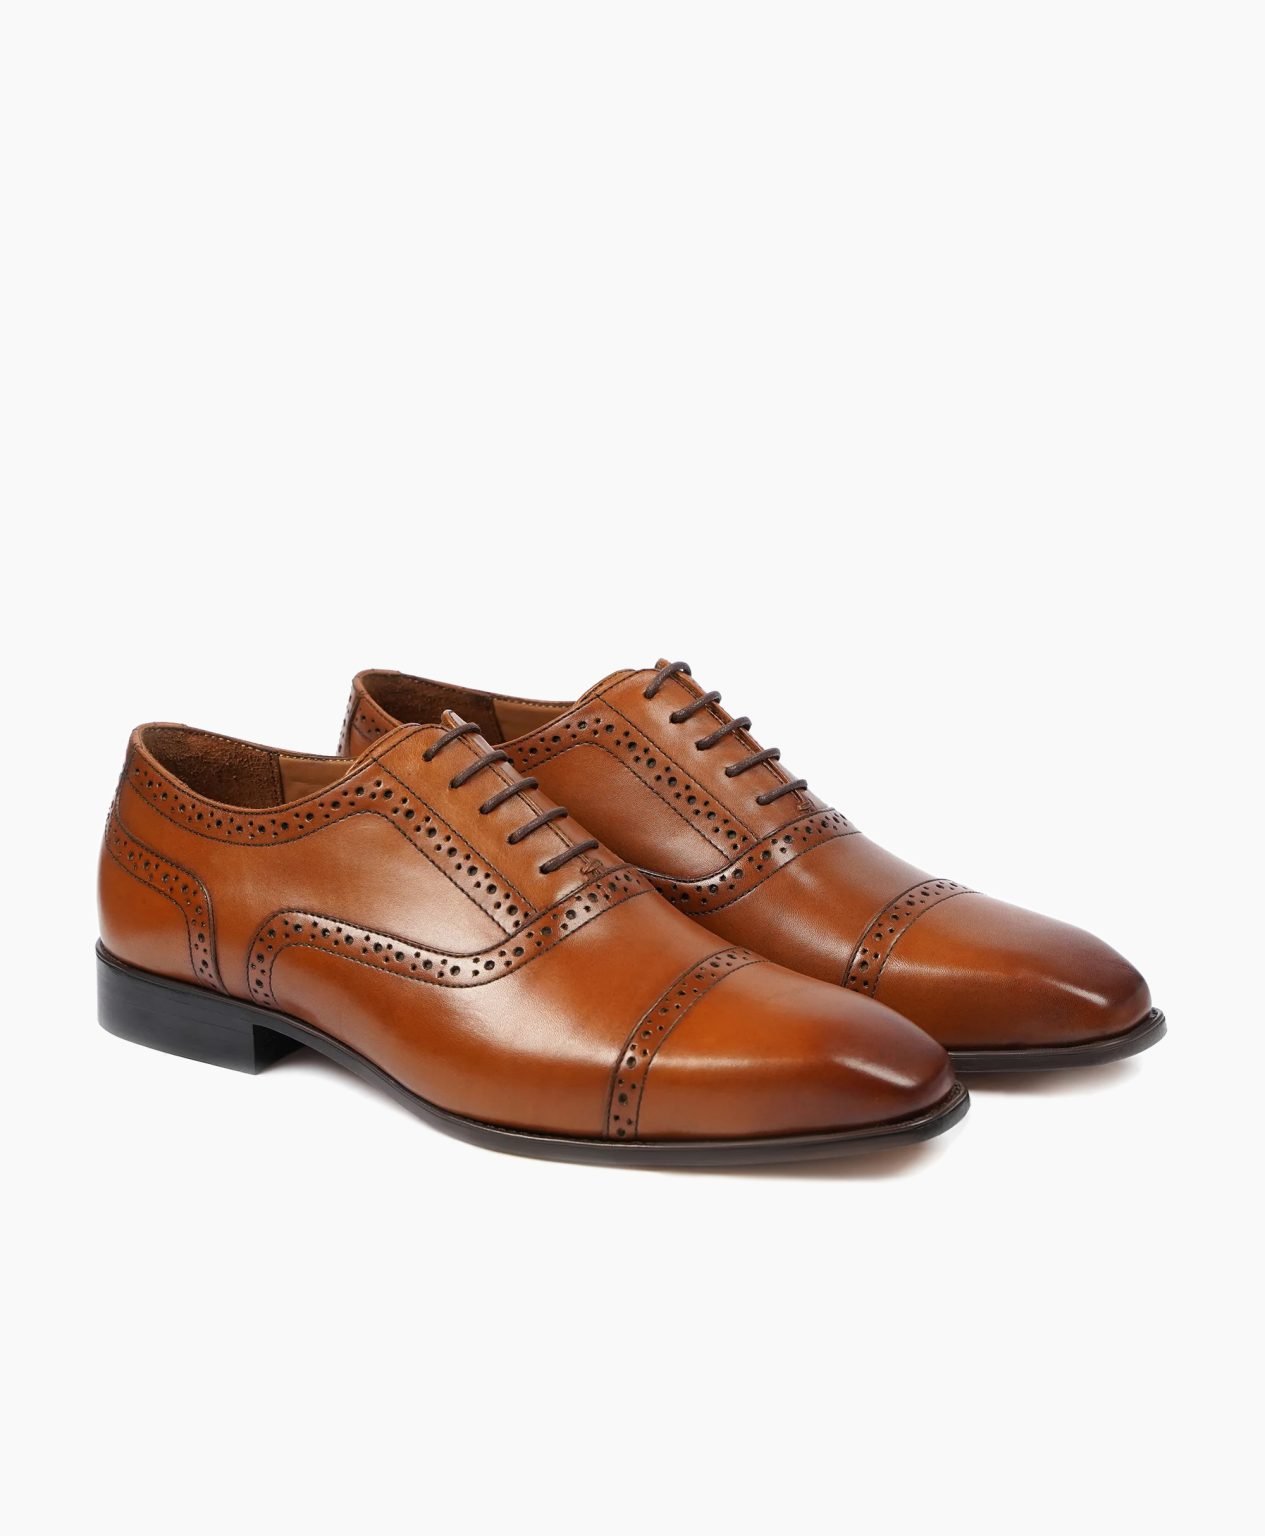 fowey-oxford-light-brown-leather-shoes-image200